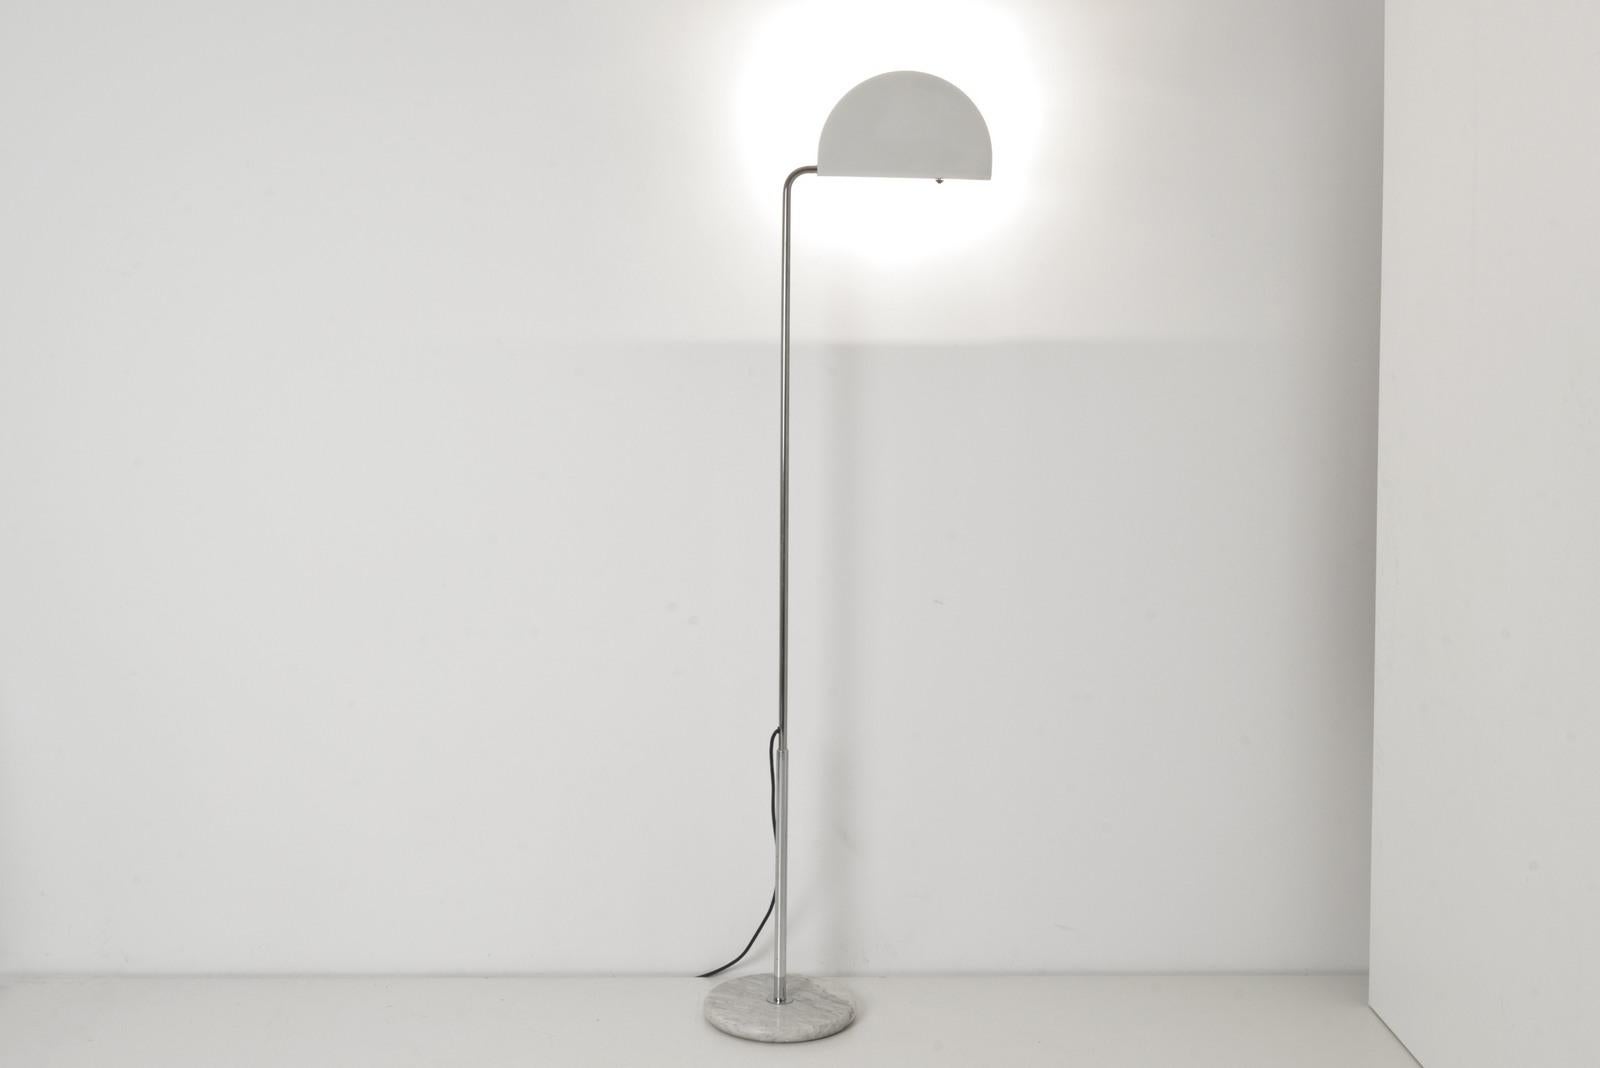 H 180 cm/215 cm W 62 cm D 35 cm

Material: Chrome-plated brass, gray marble base, white lacquered head

condition: good condition

Special features: with slight signs of use. Height-adjustable, rotatable, swiveling, with dimmer, halogen lighting up